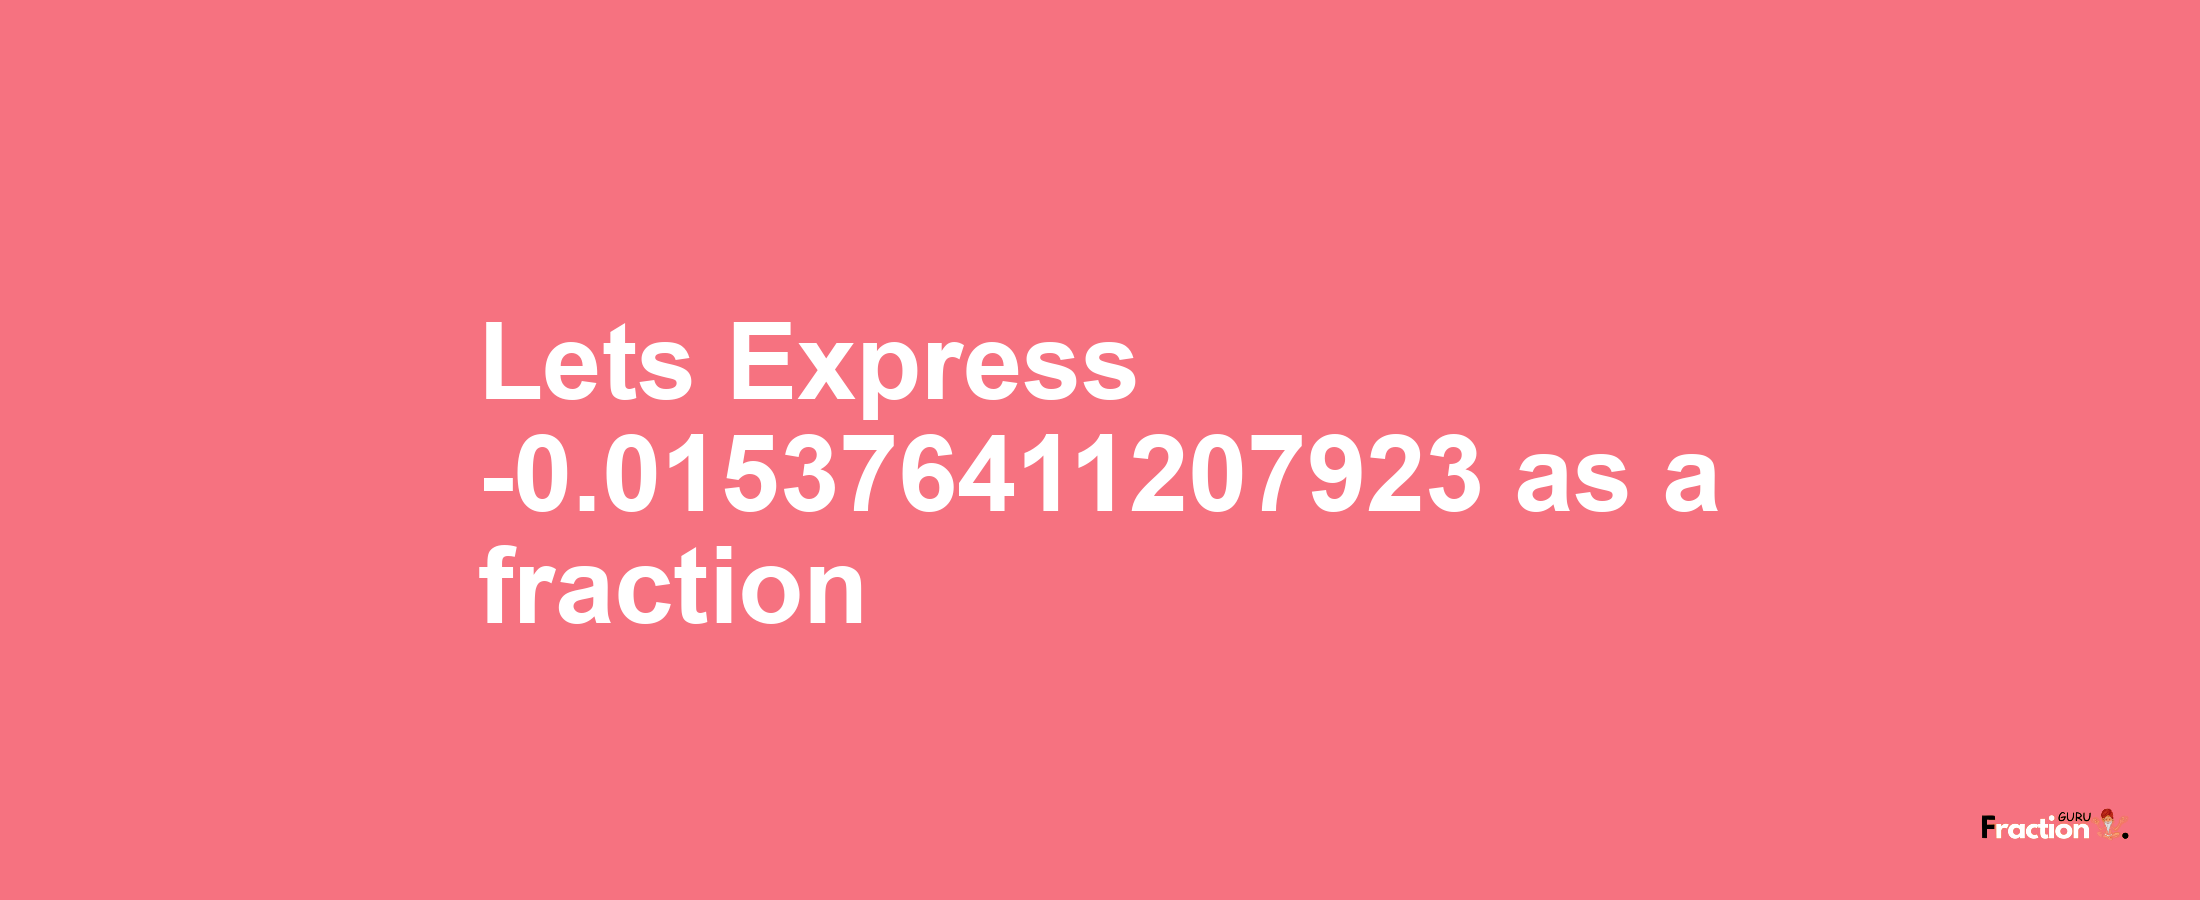 Lets Express -0.015376411207923 as afraction